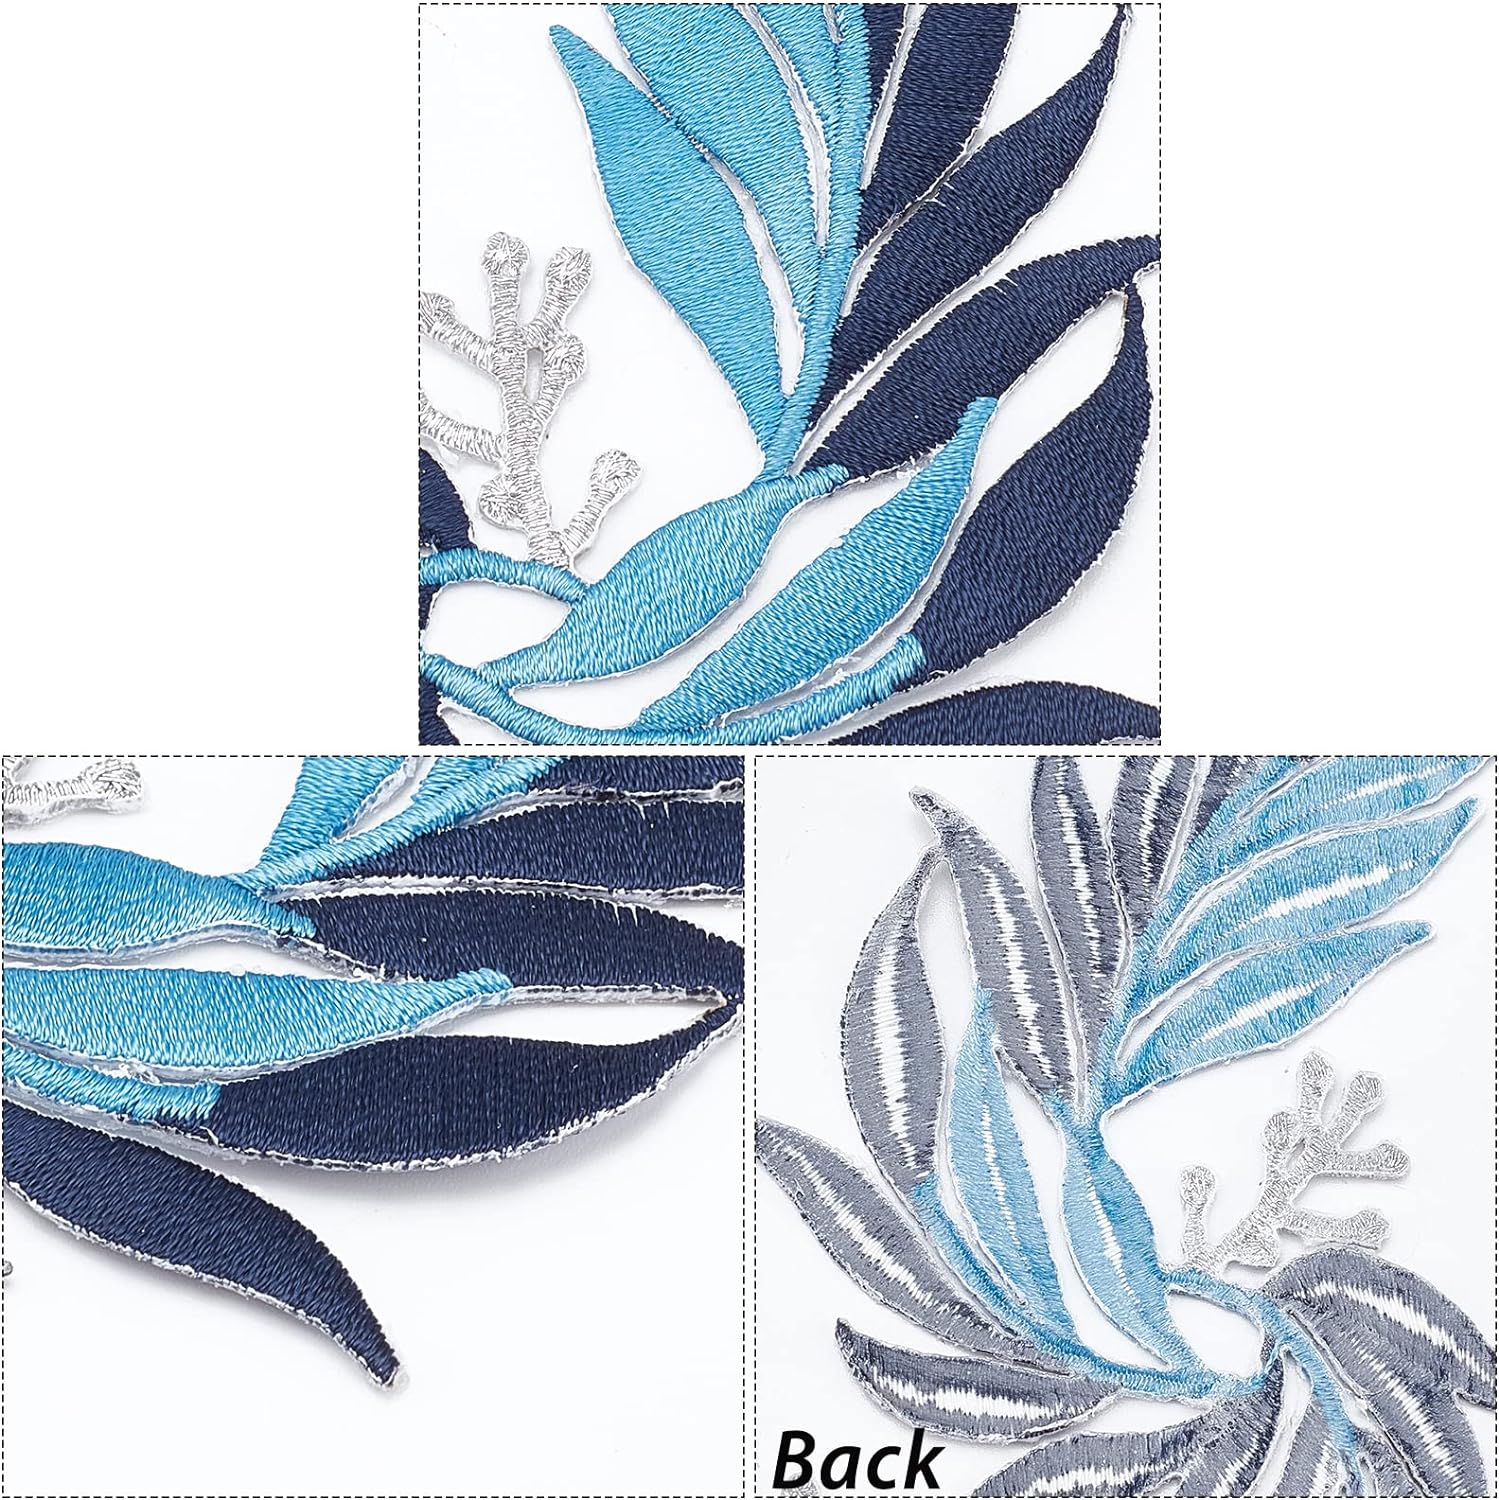 2 Pairs 4PCS Embroidered Patches Iron Leaf Flowers Lace Applique Flowers Nature Patches Suitable for Clothes Dress Hat Pants Sewing Craft Decoration(Dodger Blue) - image 2 of 9